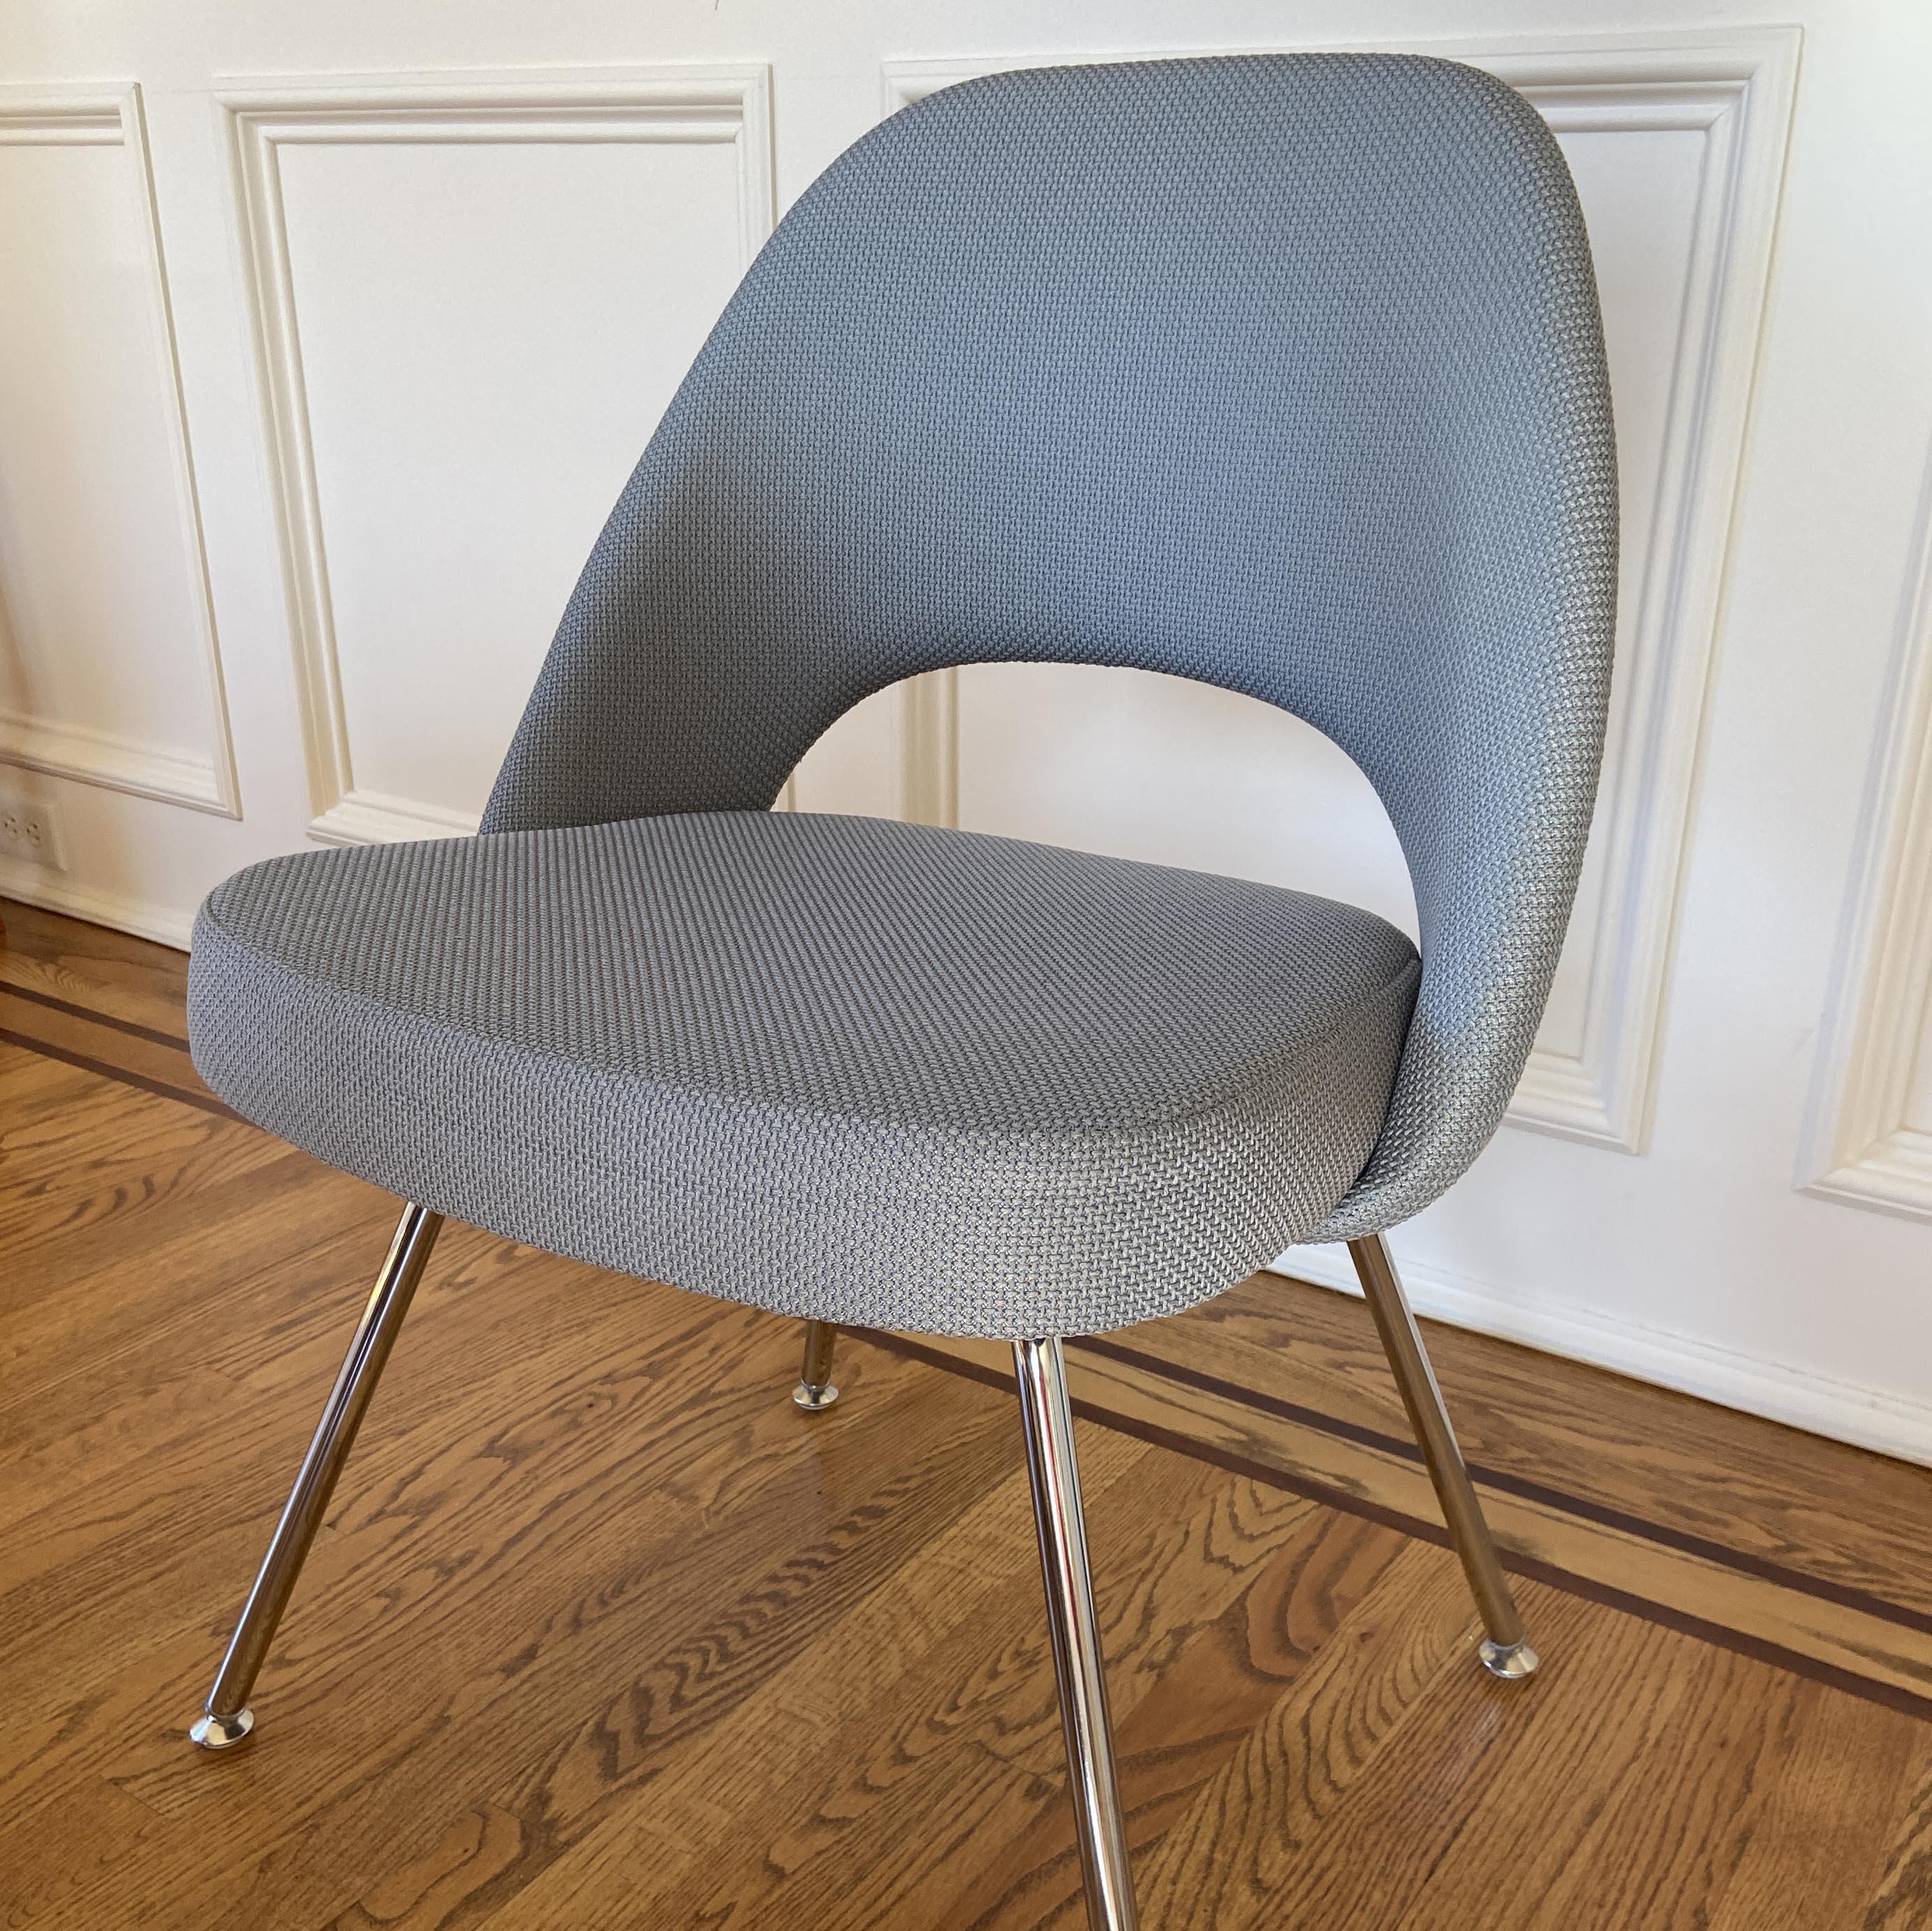 100% authentic Eero Saarinen for Knoll Executive Armless Chair recently reupholstered.  Featuring chrome tubular legs in excellent condition. We have 6 available in this handsome, durable gray fabric. Suitable for any room in the house or office. 